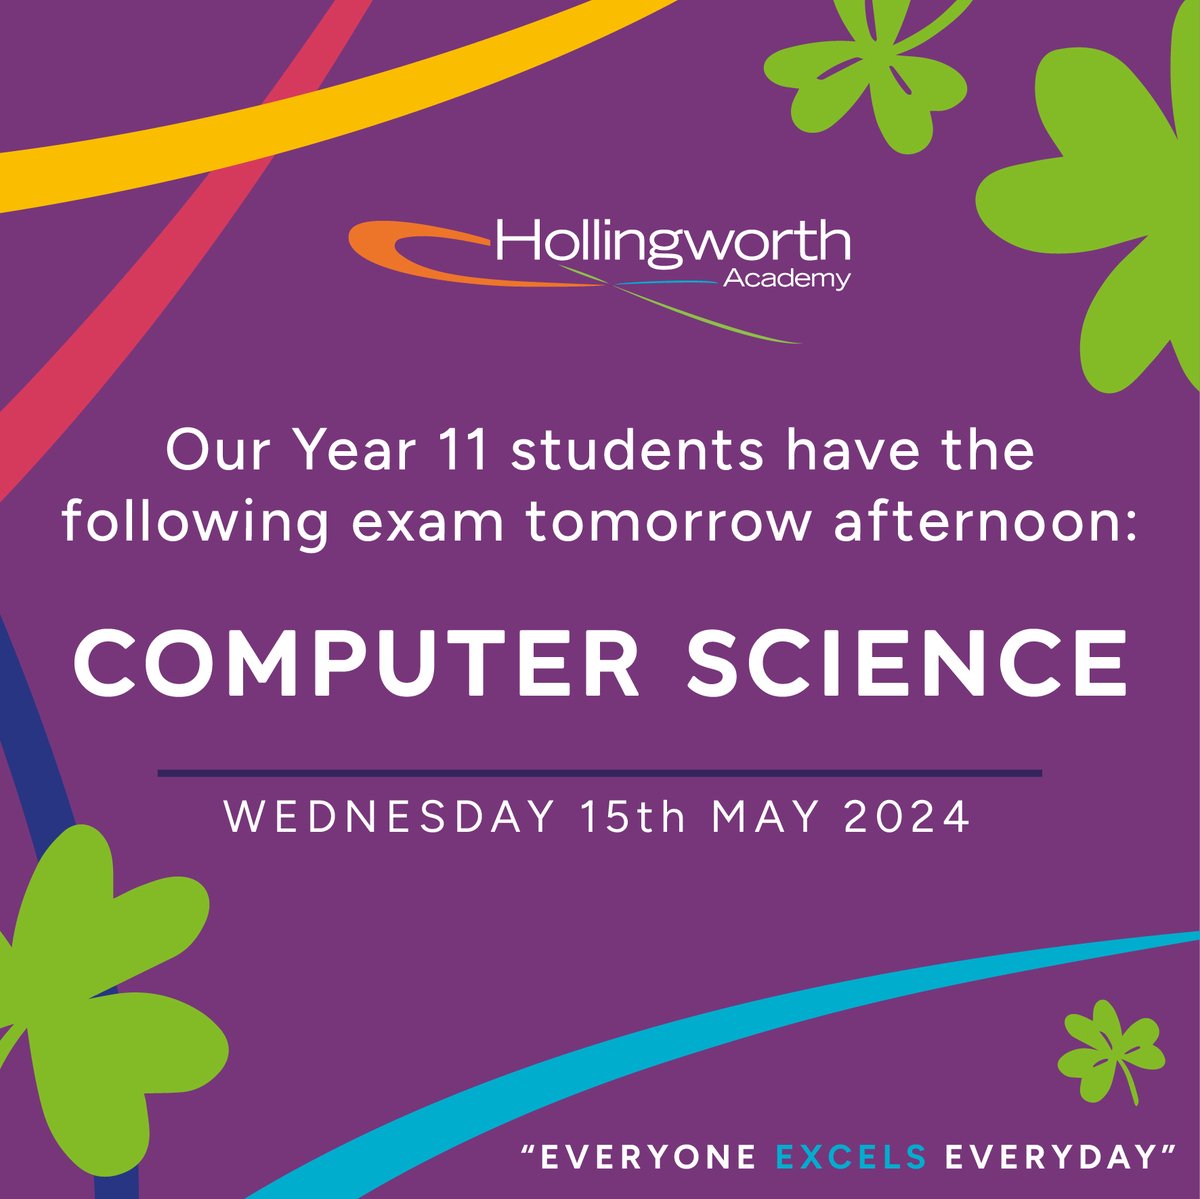 “Best of luck on your Computer Science exam. Remember your problem-solving skills are better than any computer. Take your time, read each question carefully & slowly. Use the highlighter. You've got this.” – The ICT Department 🍀✨ @WCSQM #worldclass #everyoneexcelseveryday